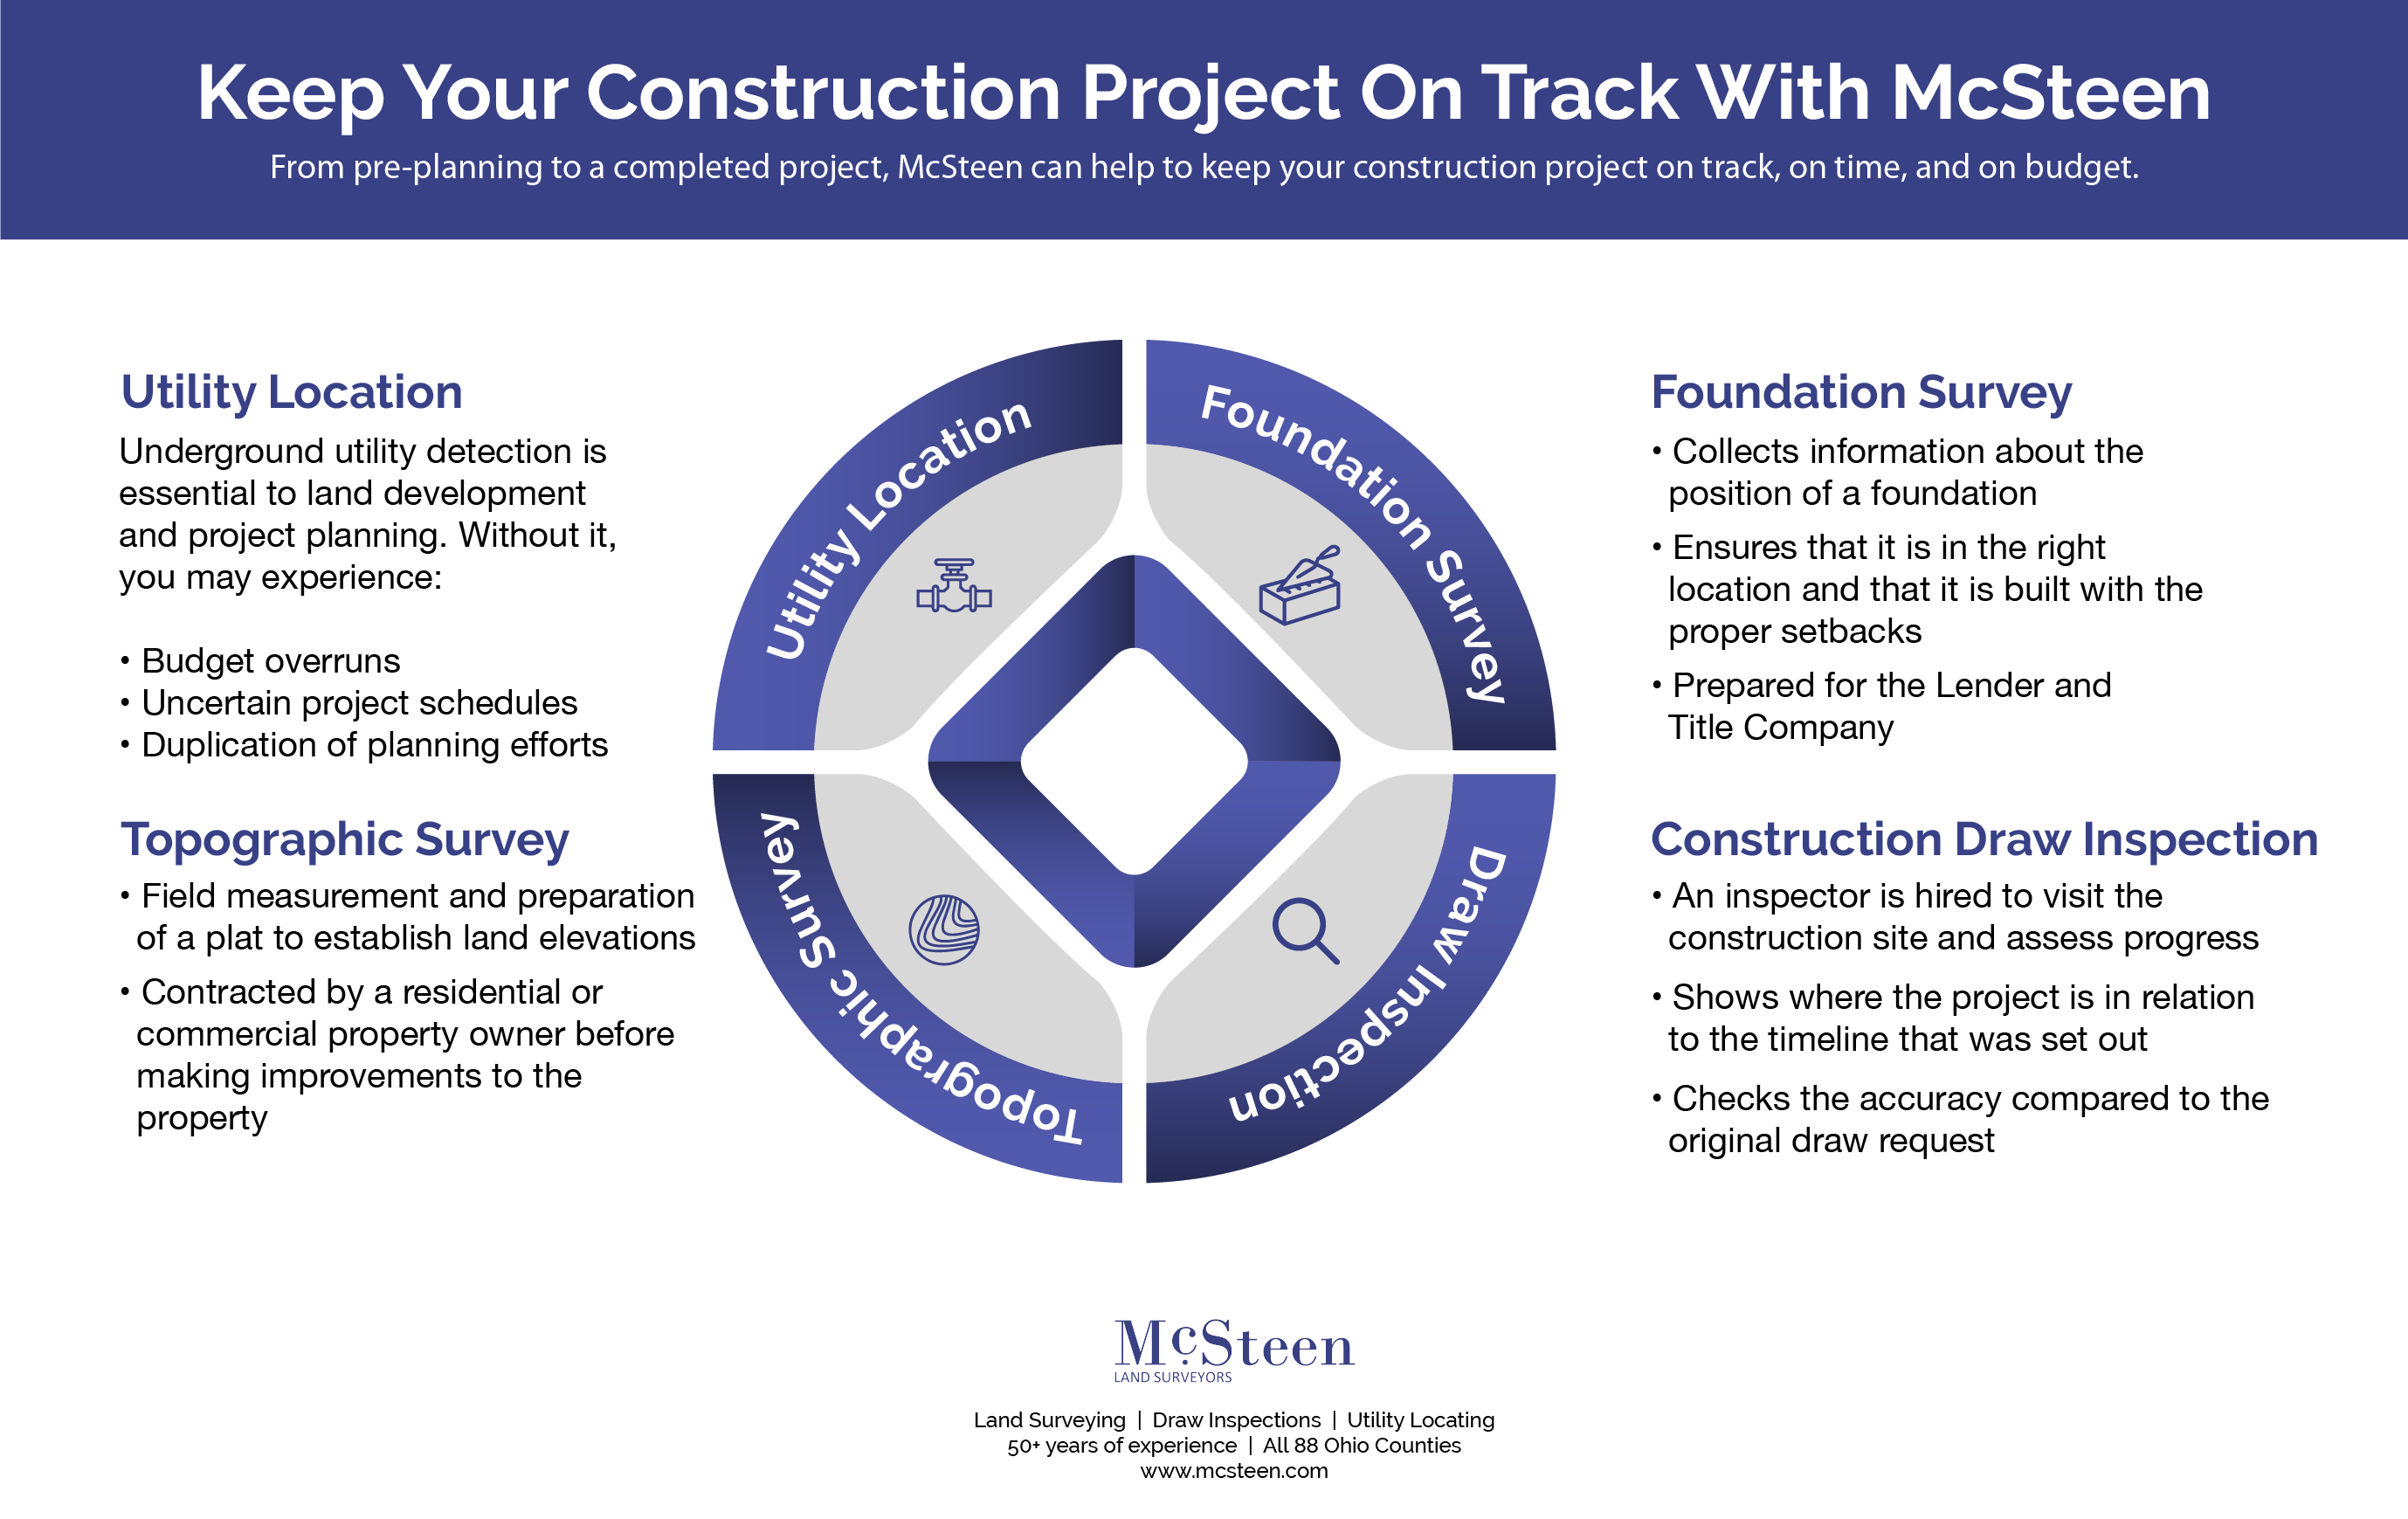 Keep Your Construction Project on Track infographic.